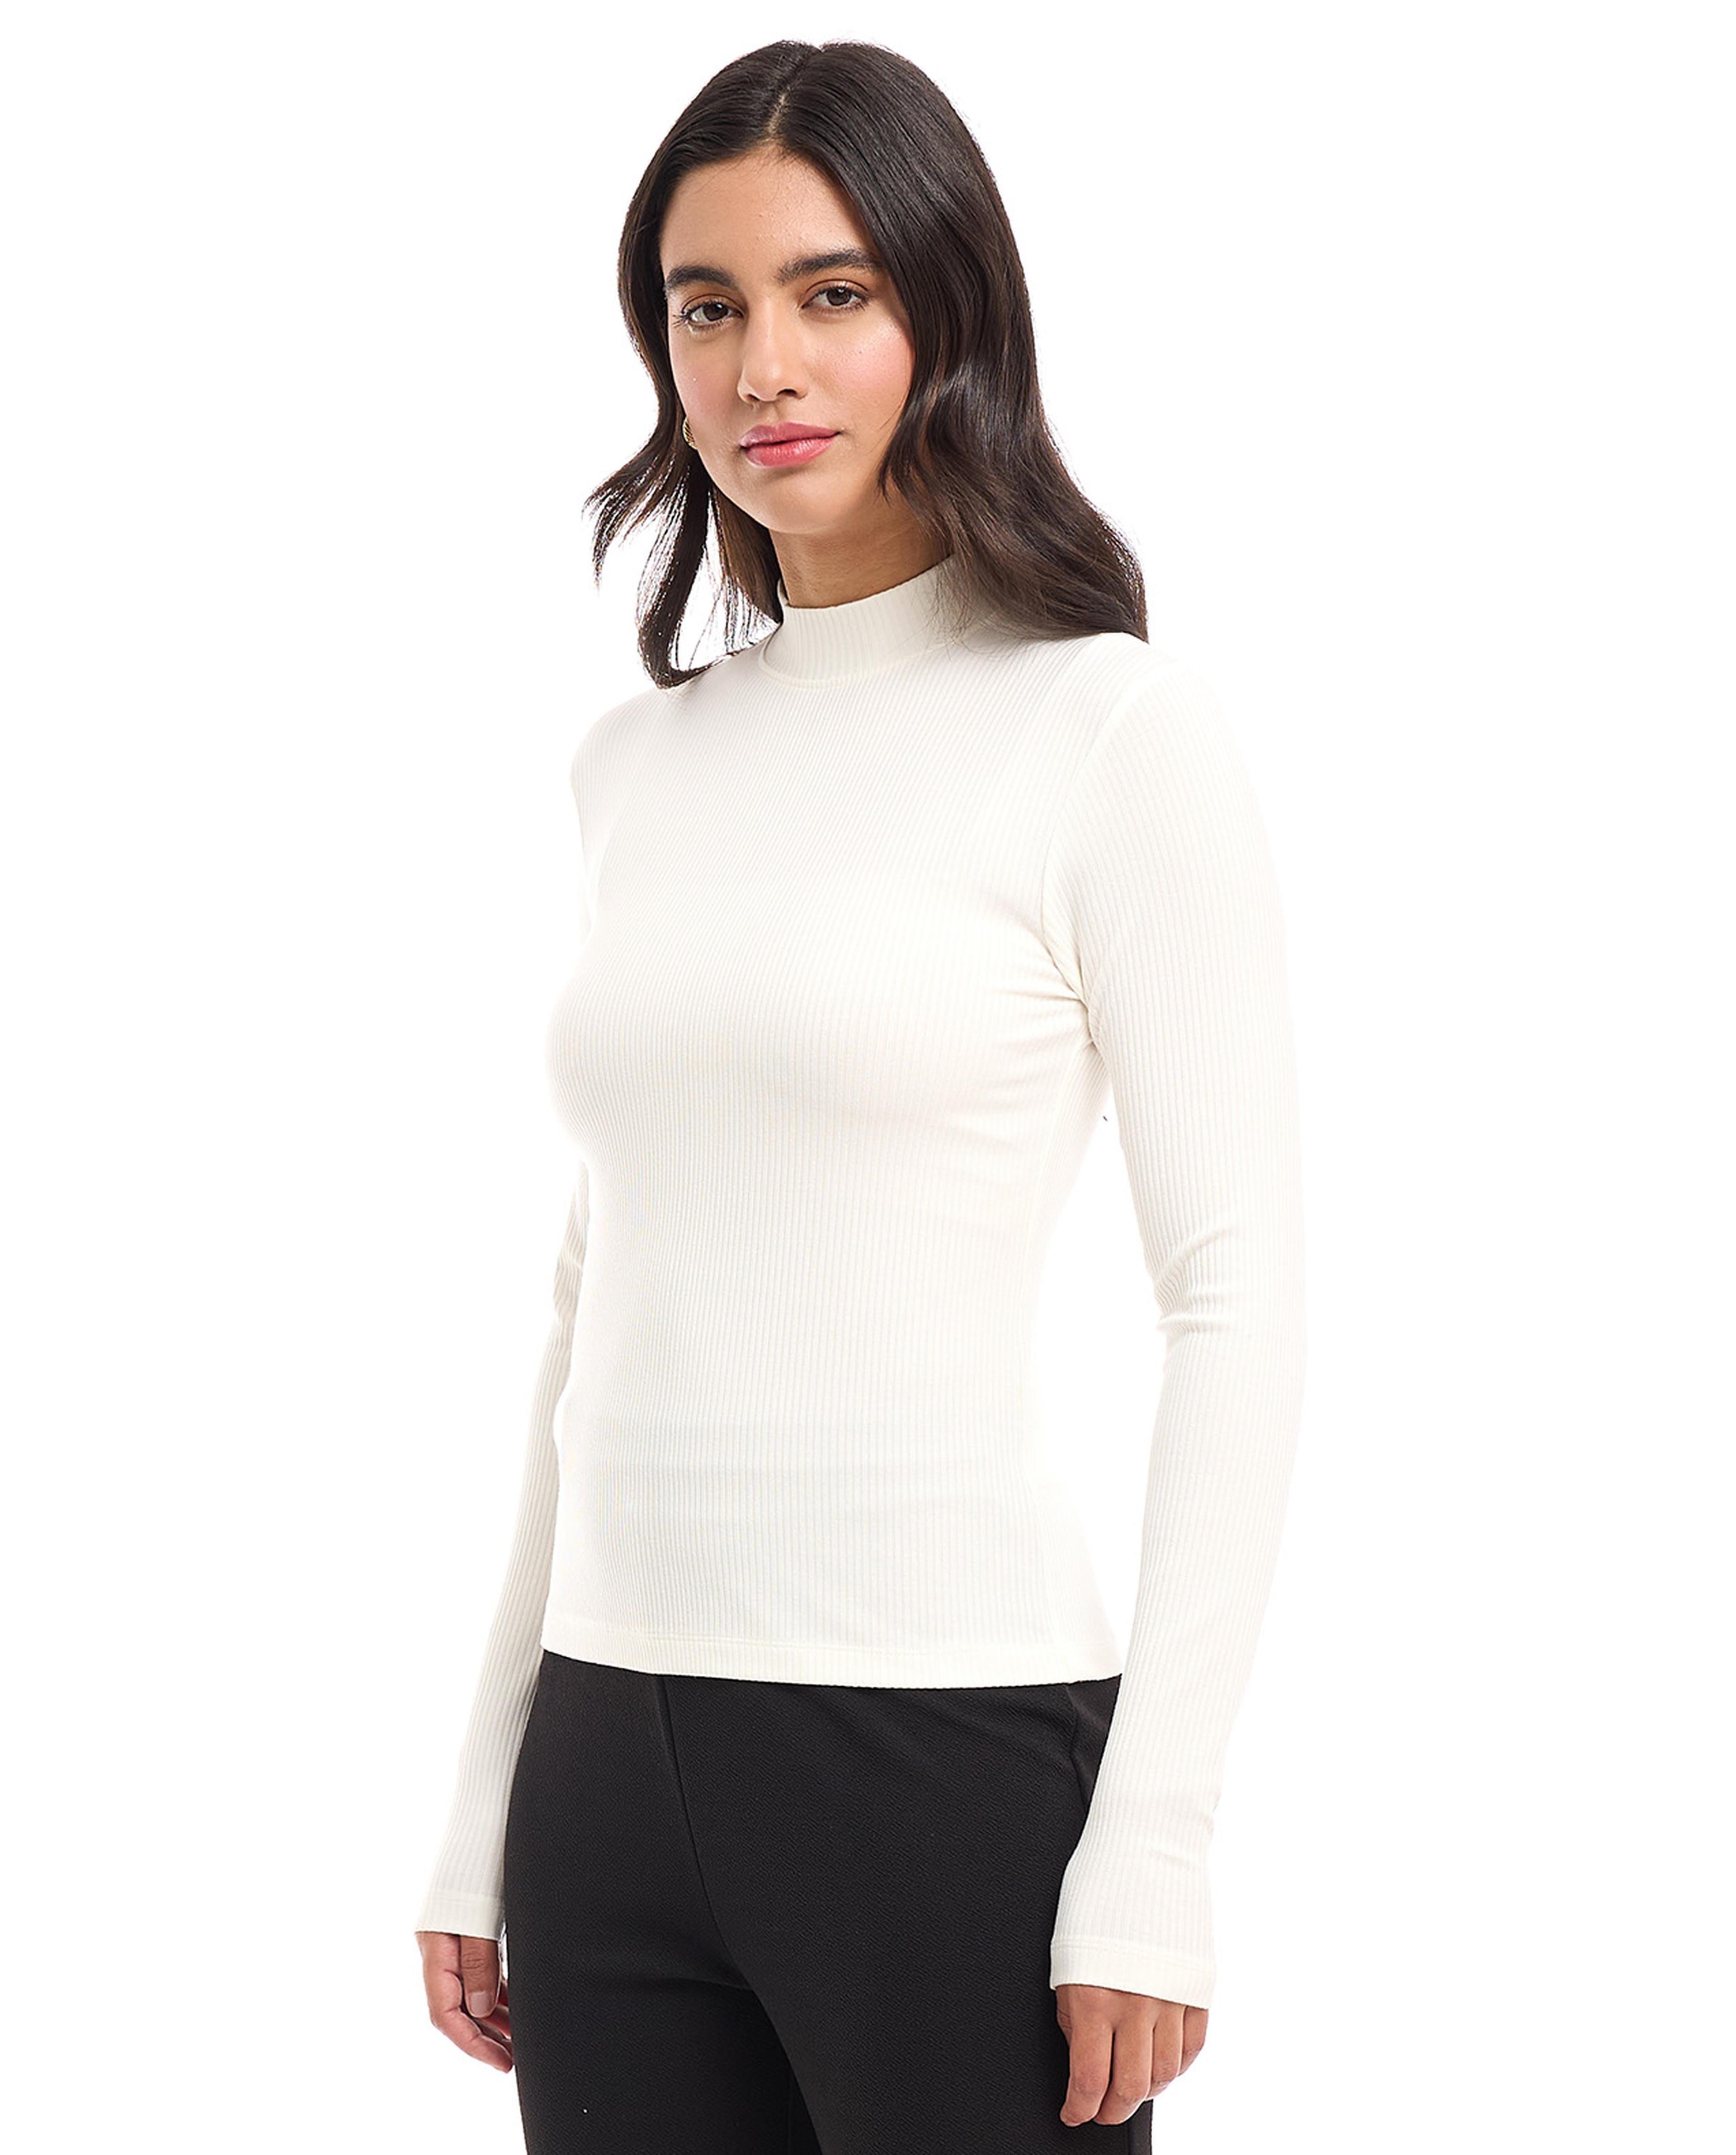 Ribbed Top with Mock Neck and Long Sleeves